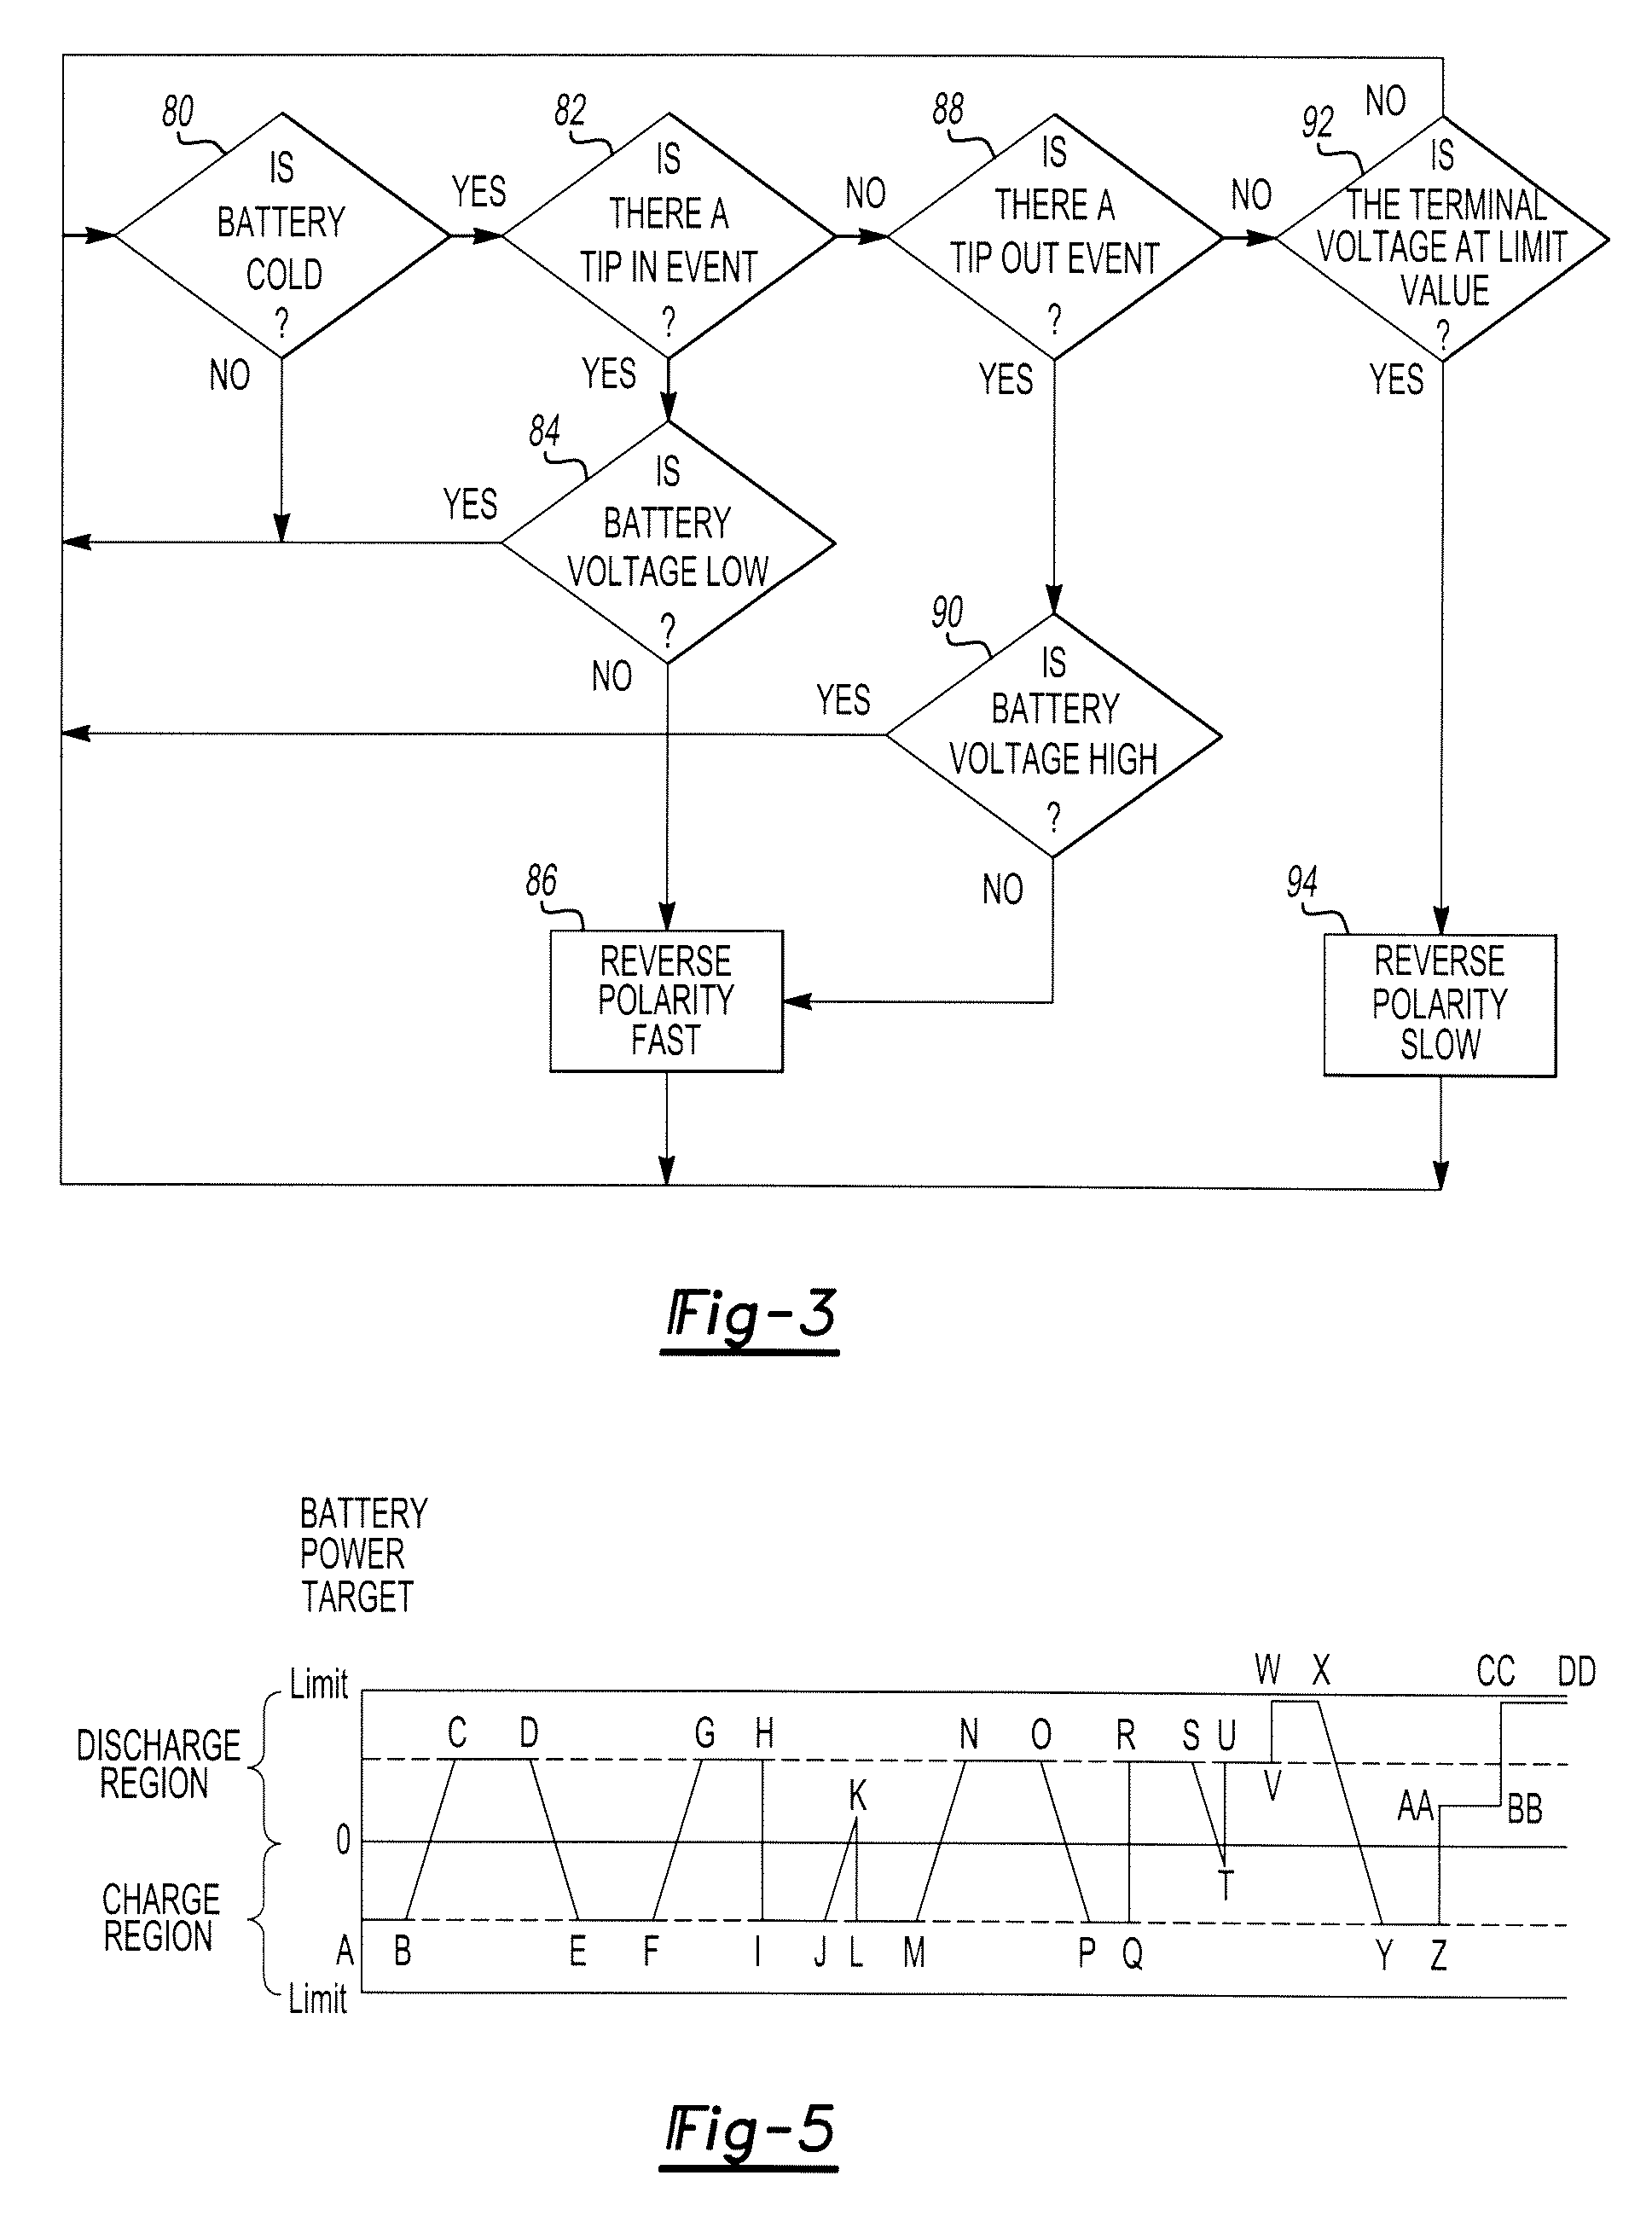 Method for heating a battery in a hybrid electric vehicle